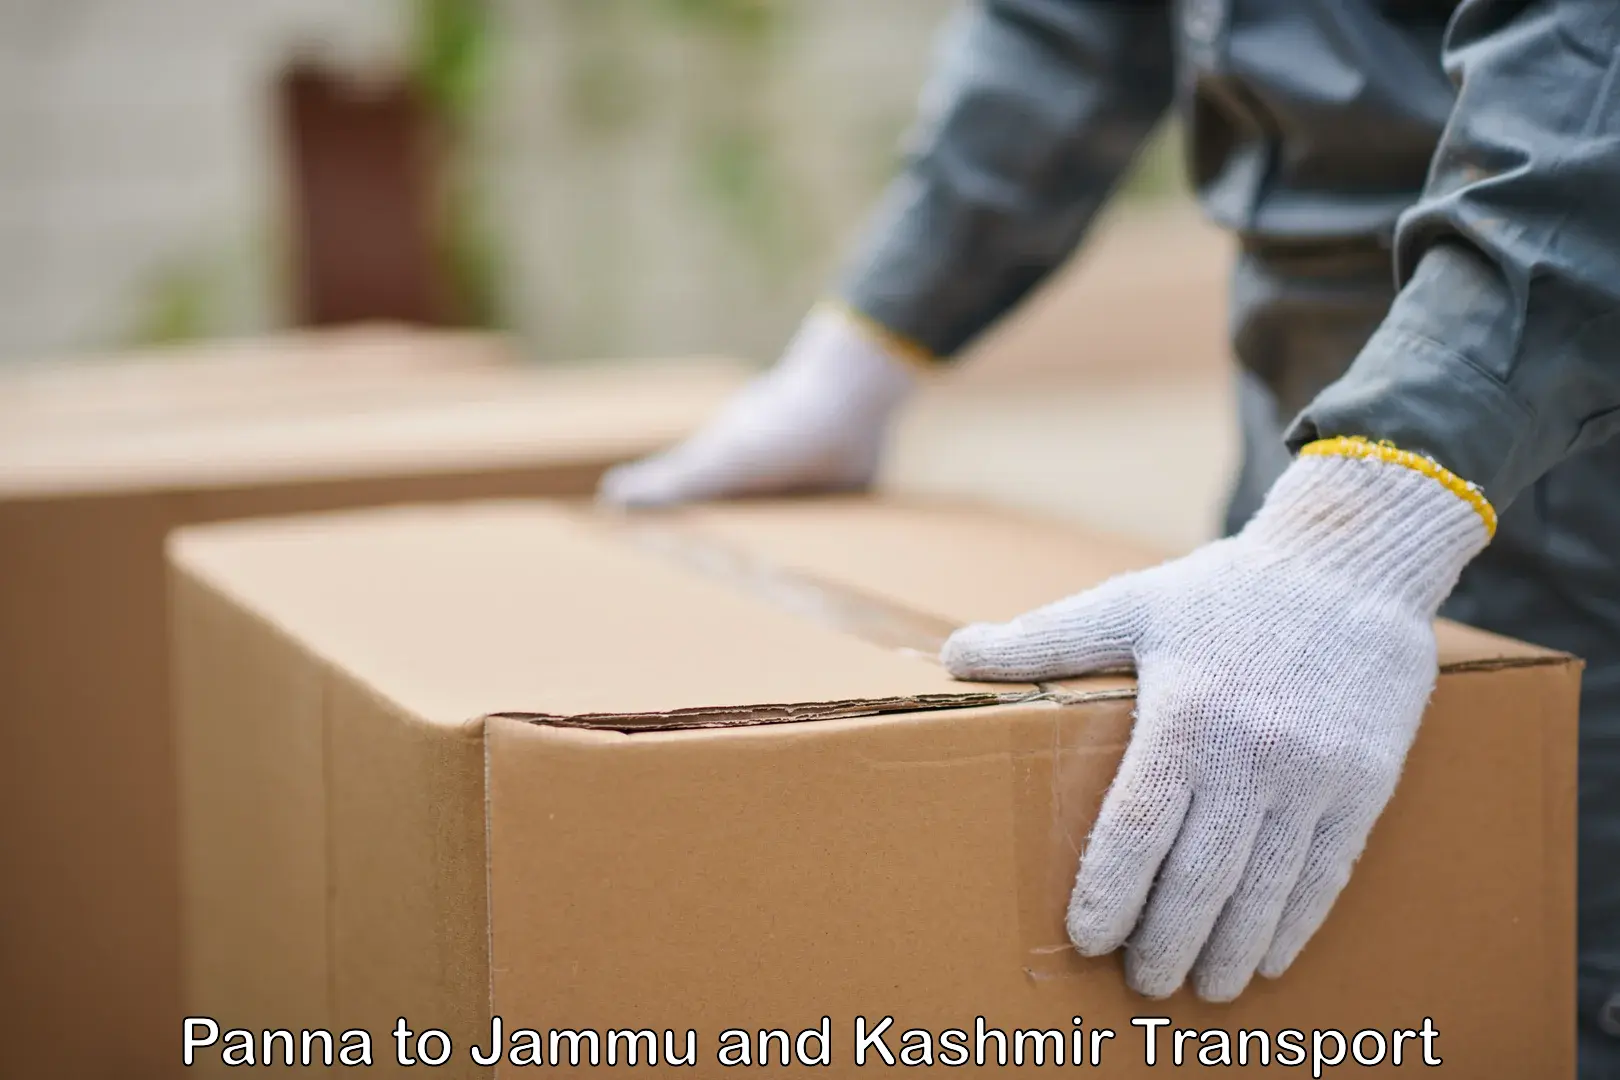 Commercial transport service Panna to Jammu and Kashmir